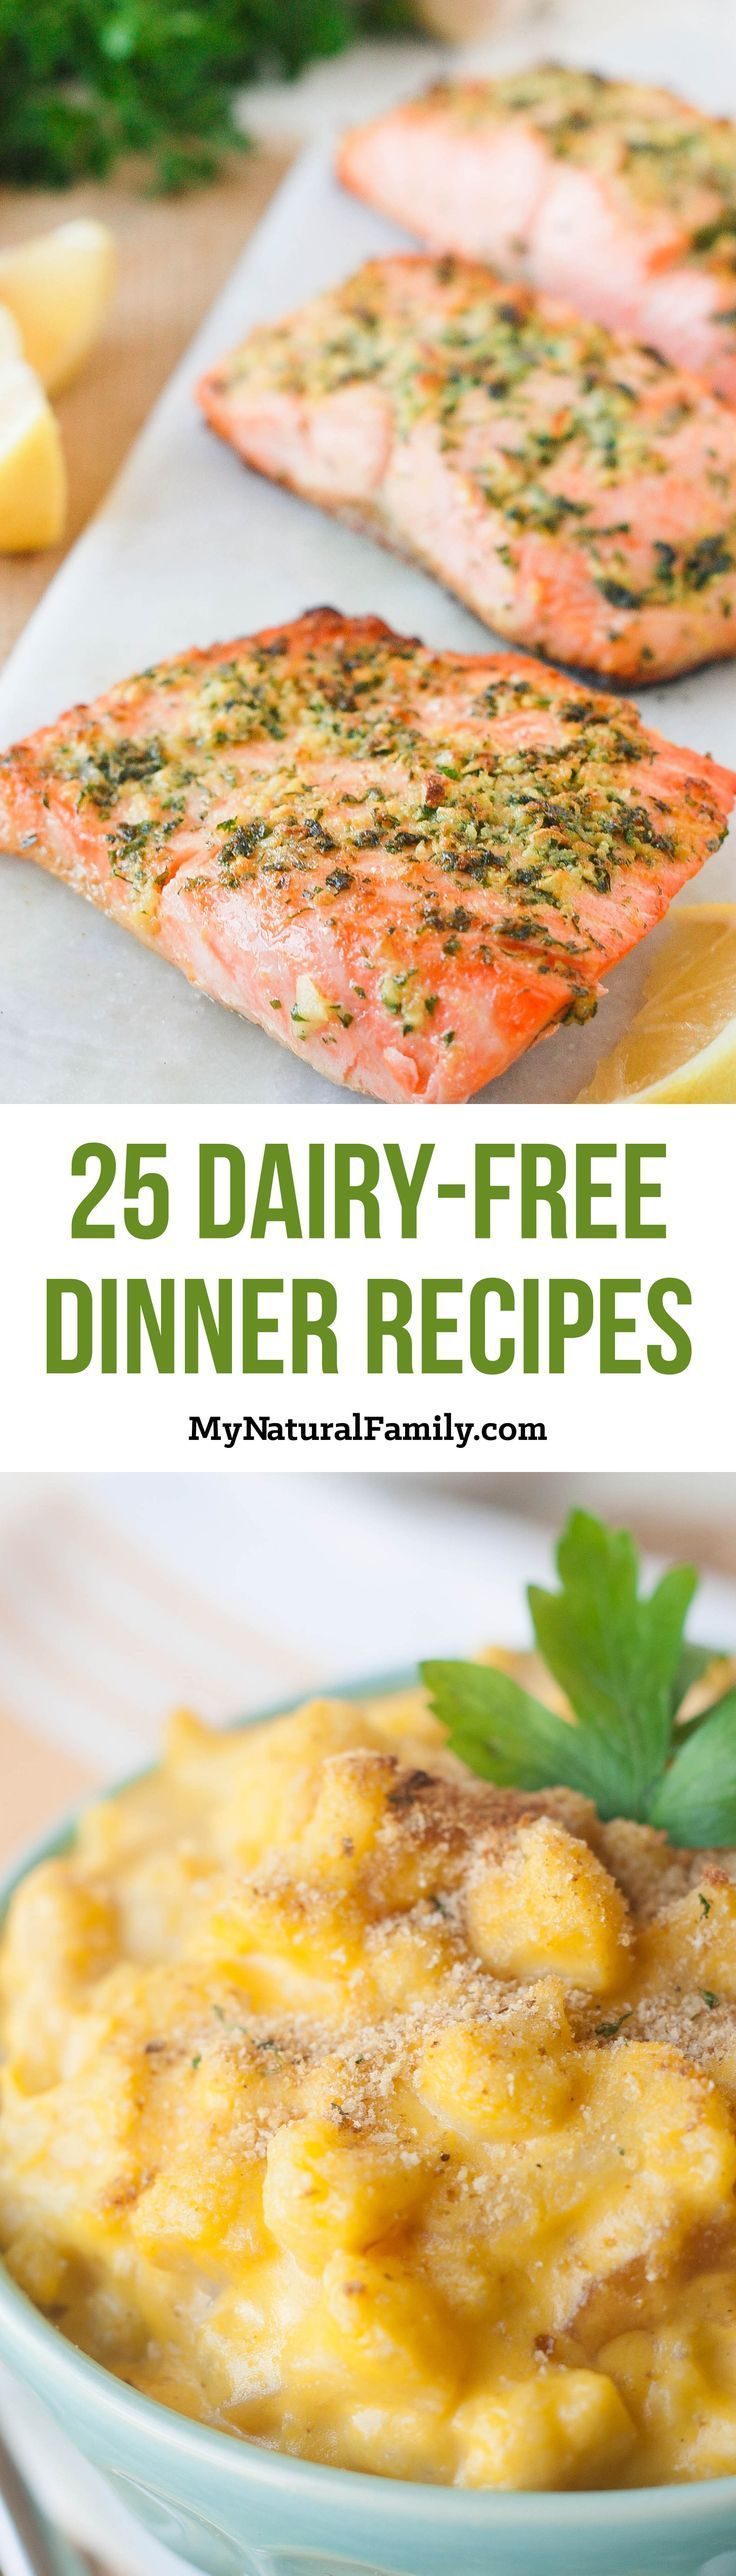 50 Dairy-Free Dinner Recipes – I want to try all of these! I love how there is a photo for each recipe and a link to click to get